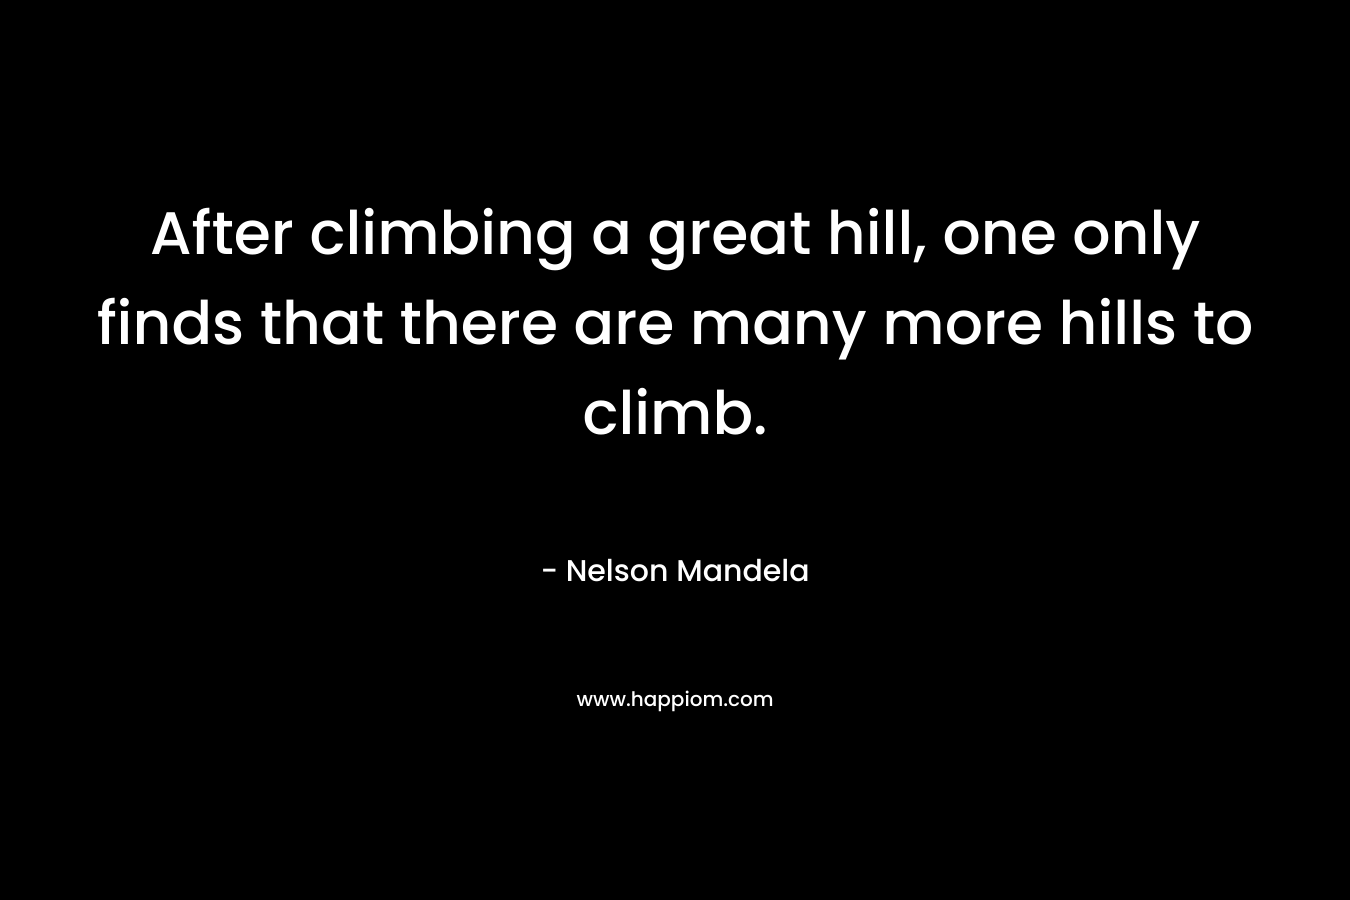 After climbing a great hill, one only finds that there are many more hills to climb. – Nelson Mandela